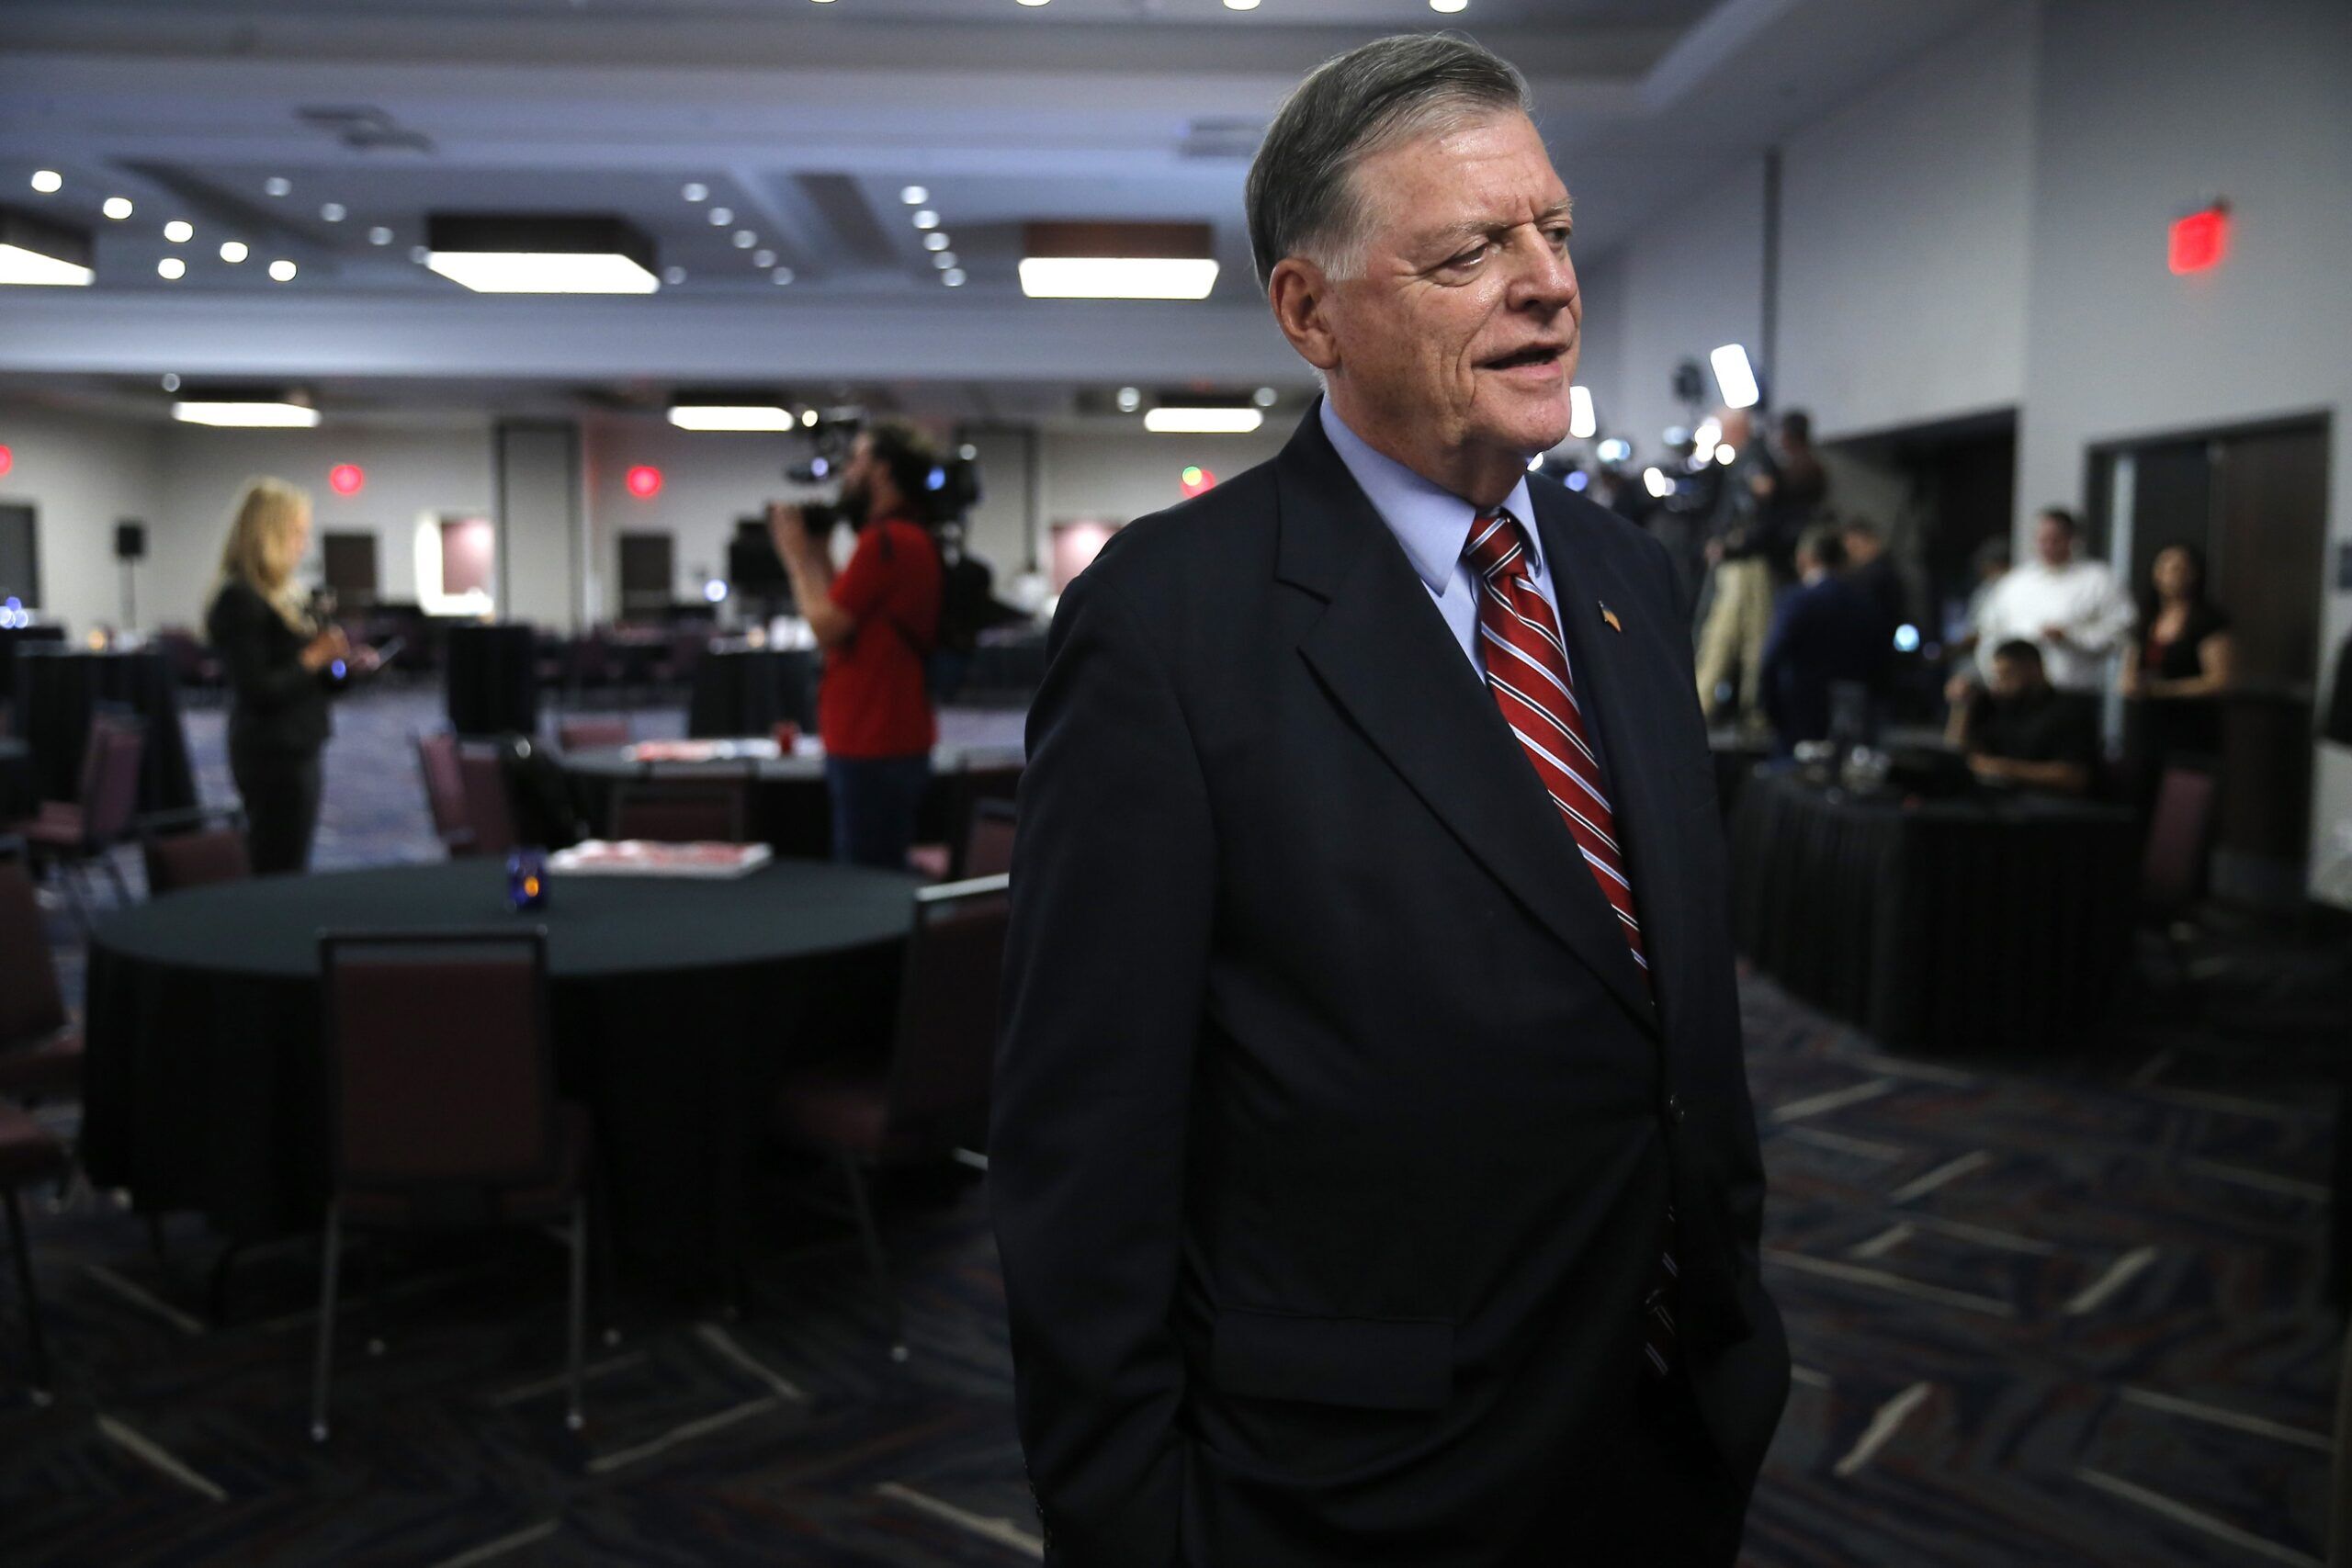 Nov 8, 2022; Oklahoma City, OK, USA; U.S. Rep. Tom Cole-(R), stands during an election night watch party in Oklahoma City